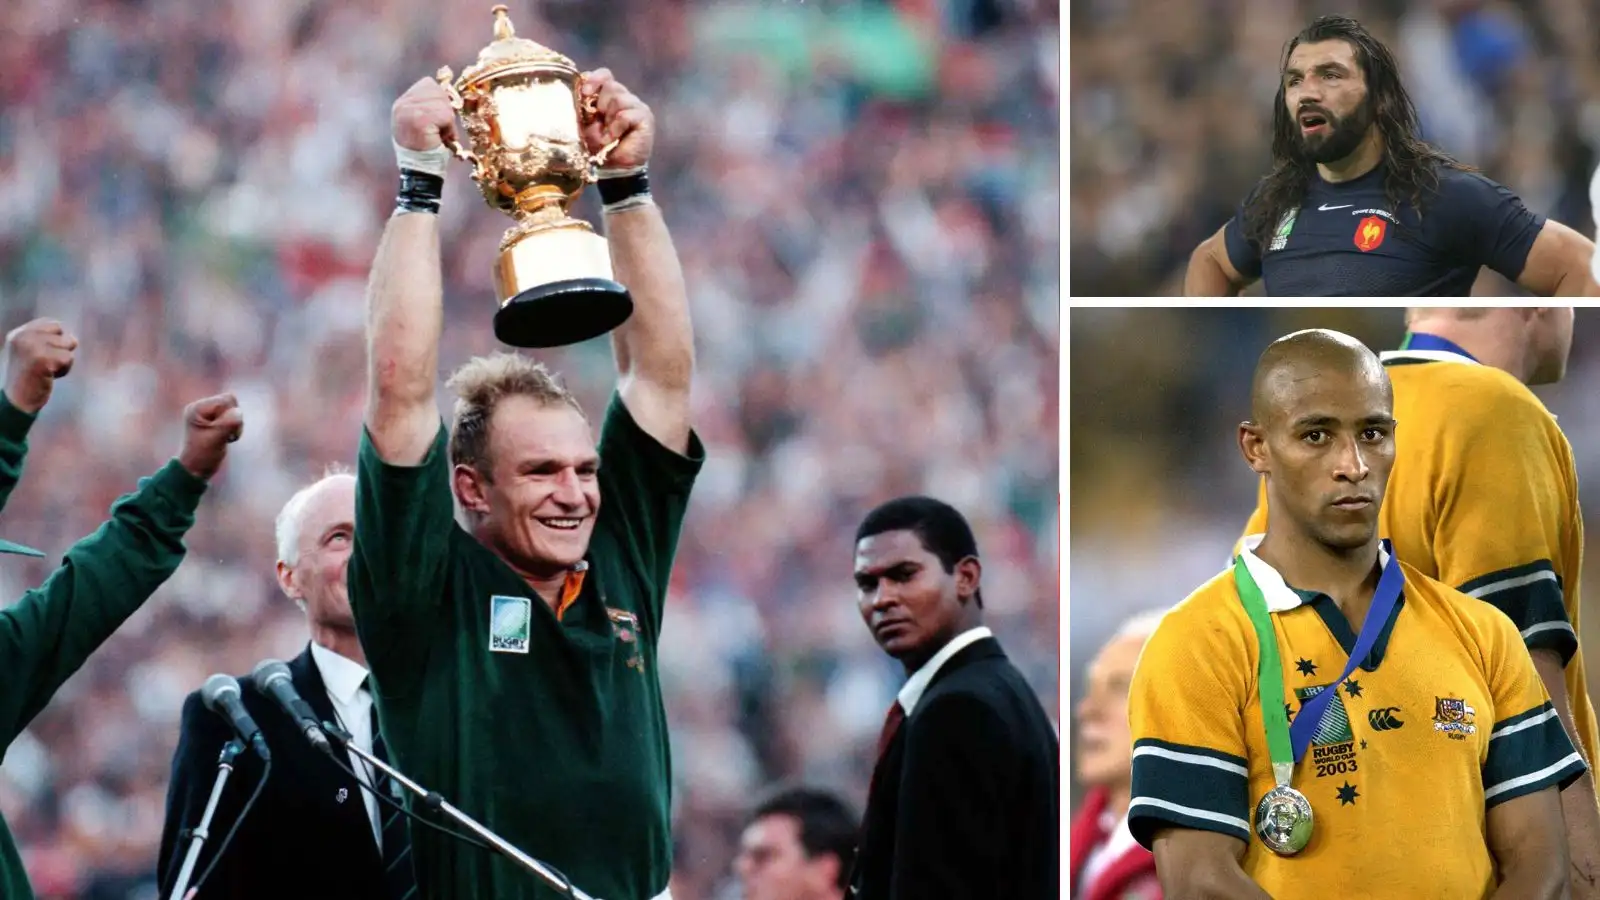 Split image of former Springboks captain Francois Pienaar hoisting the Rugby World Cup trophy as along with images of France's Sebastien Chabal and Australia's George Gregan.